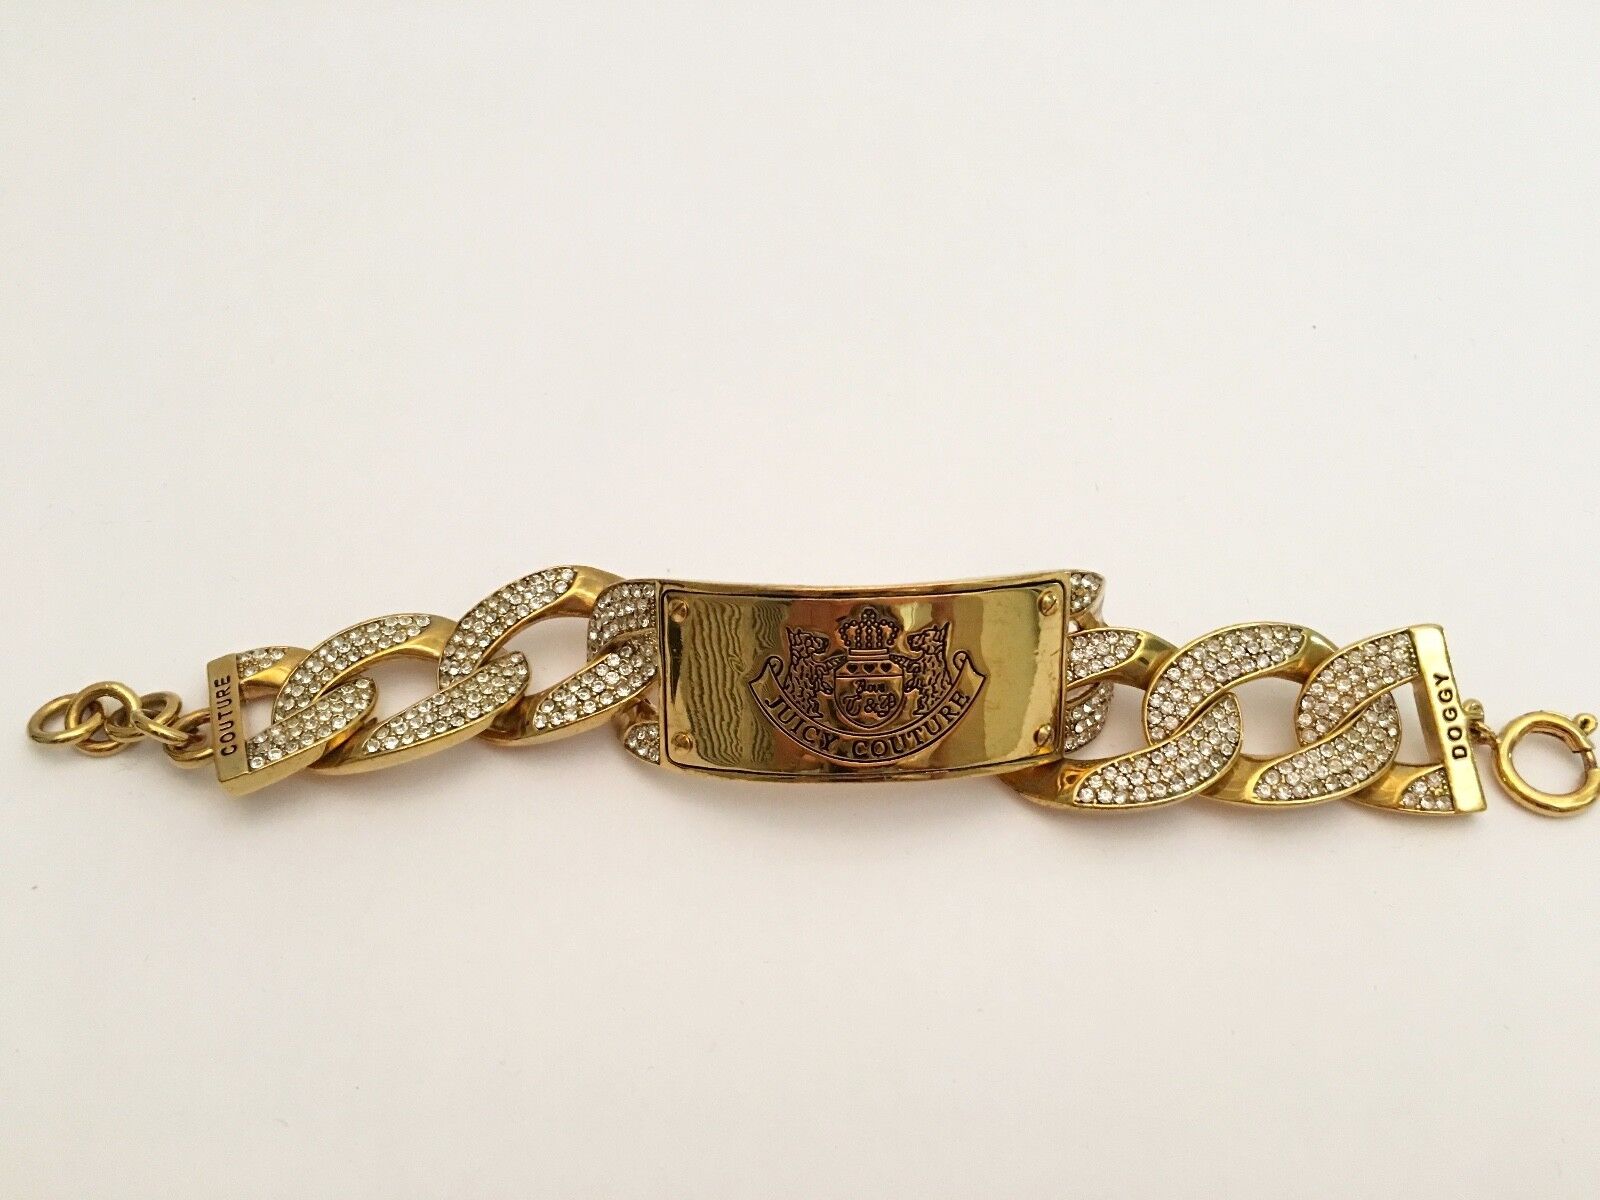 JUICY COUTURE I.D. Bracelet Dog Collar Doggy Couture Gold BLING Rhinestones NEW